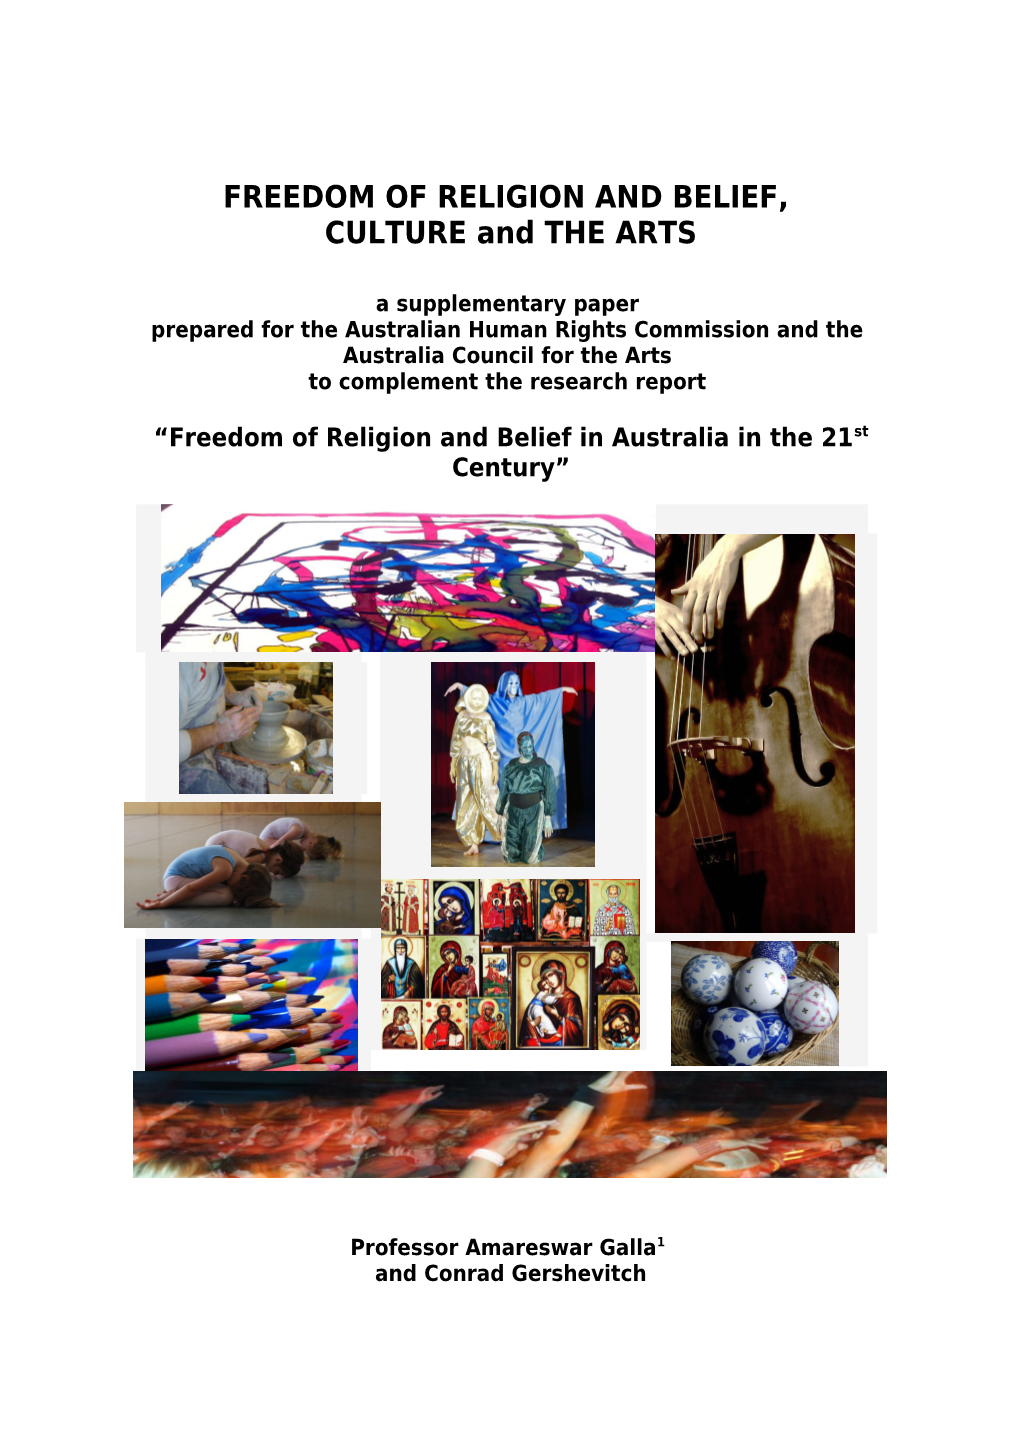 Freedom of Religion and Belief and the Arts